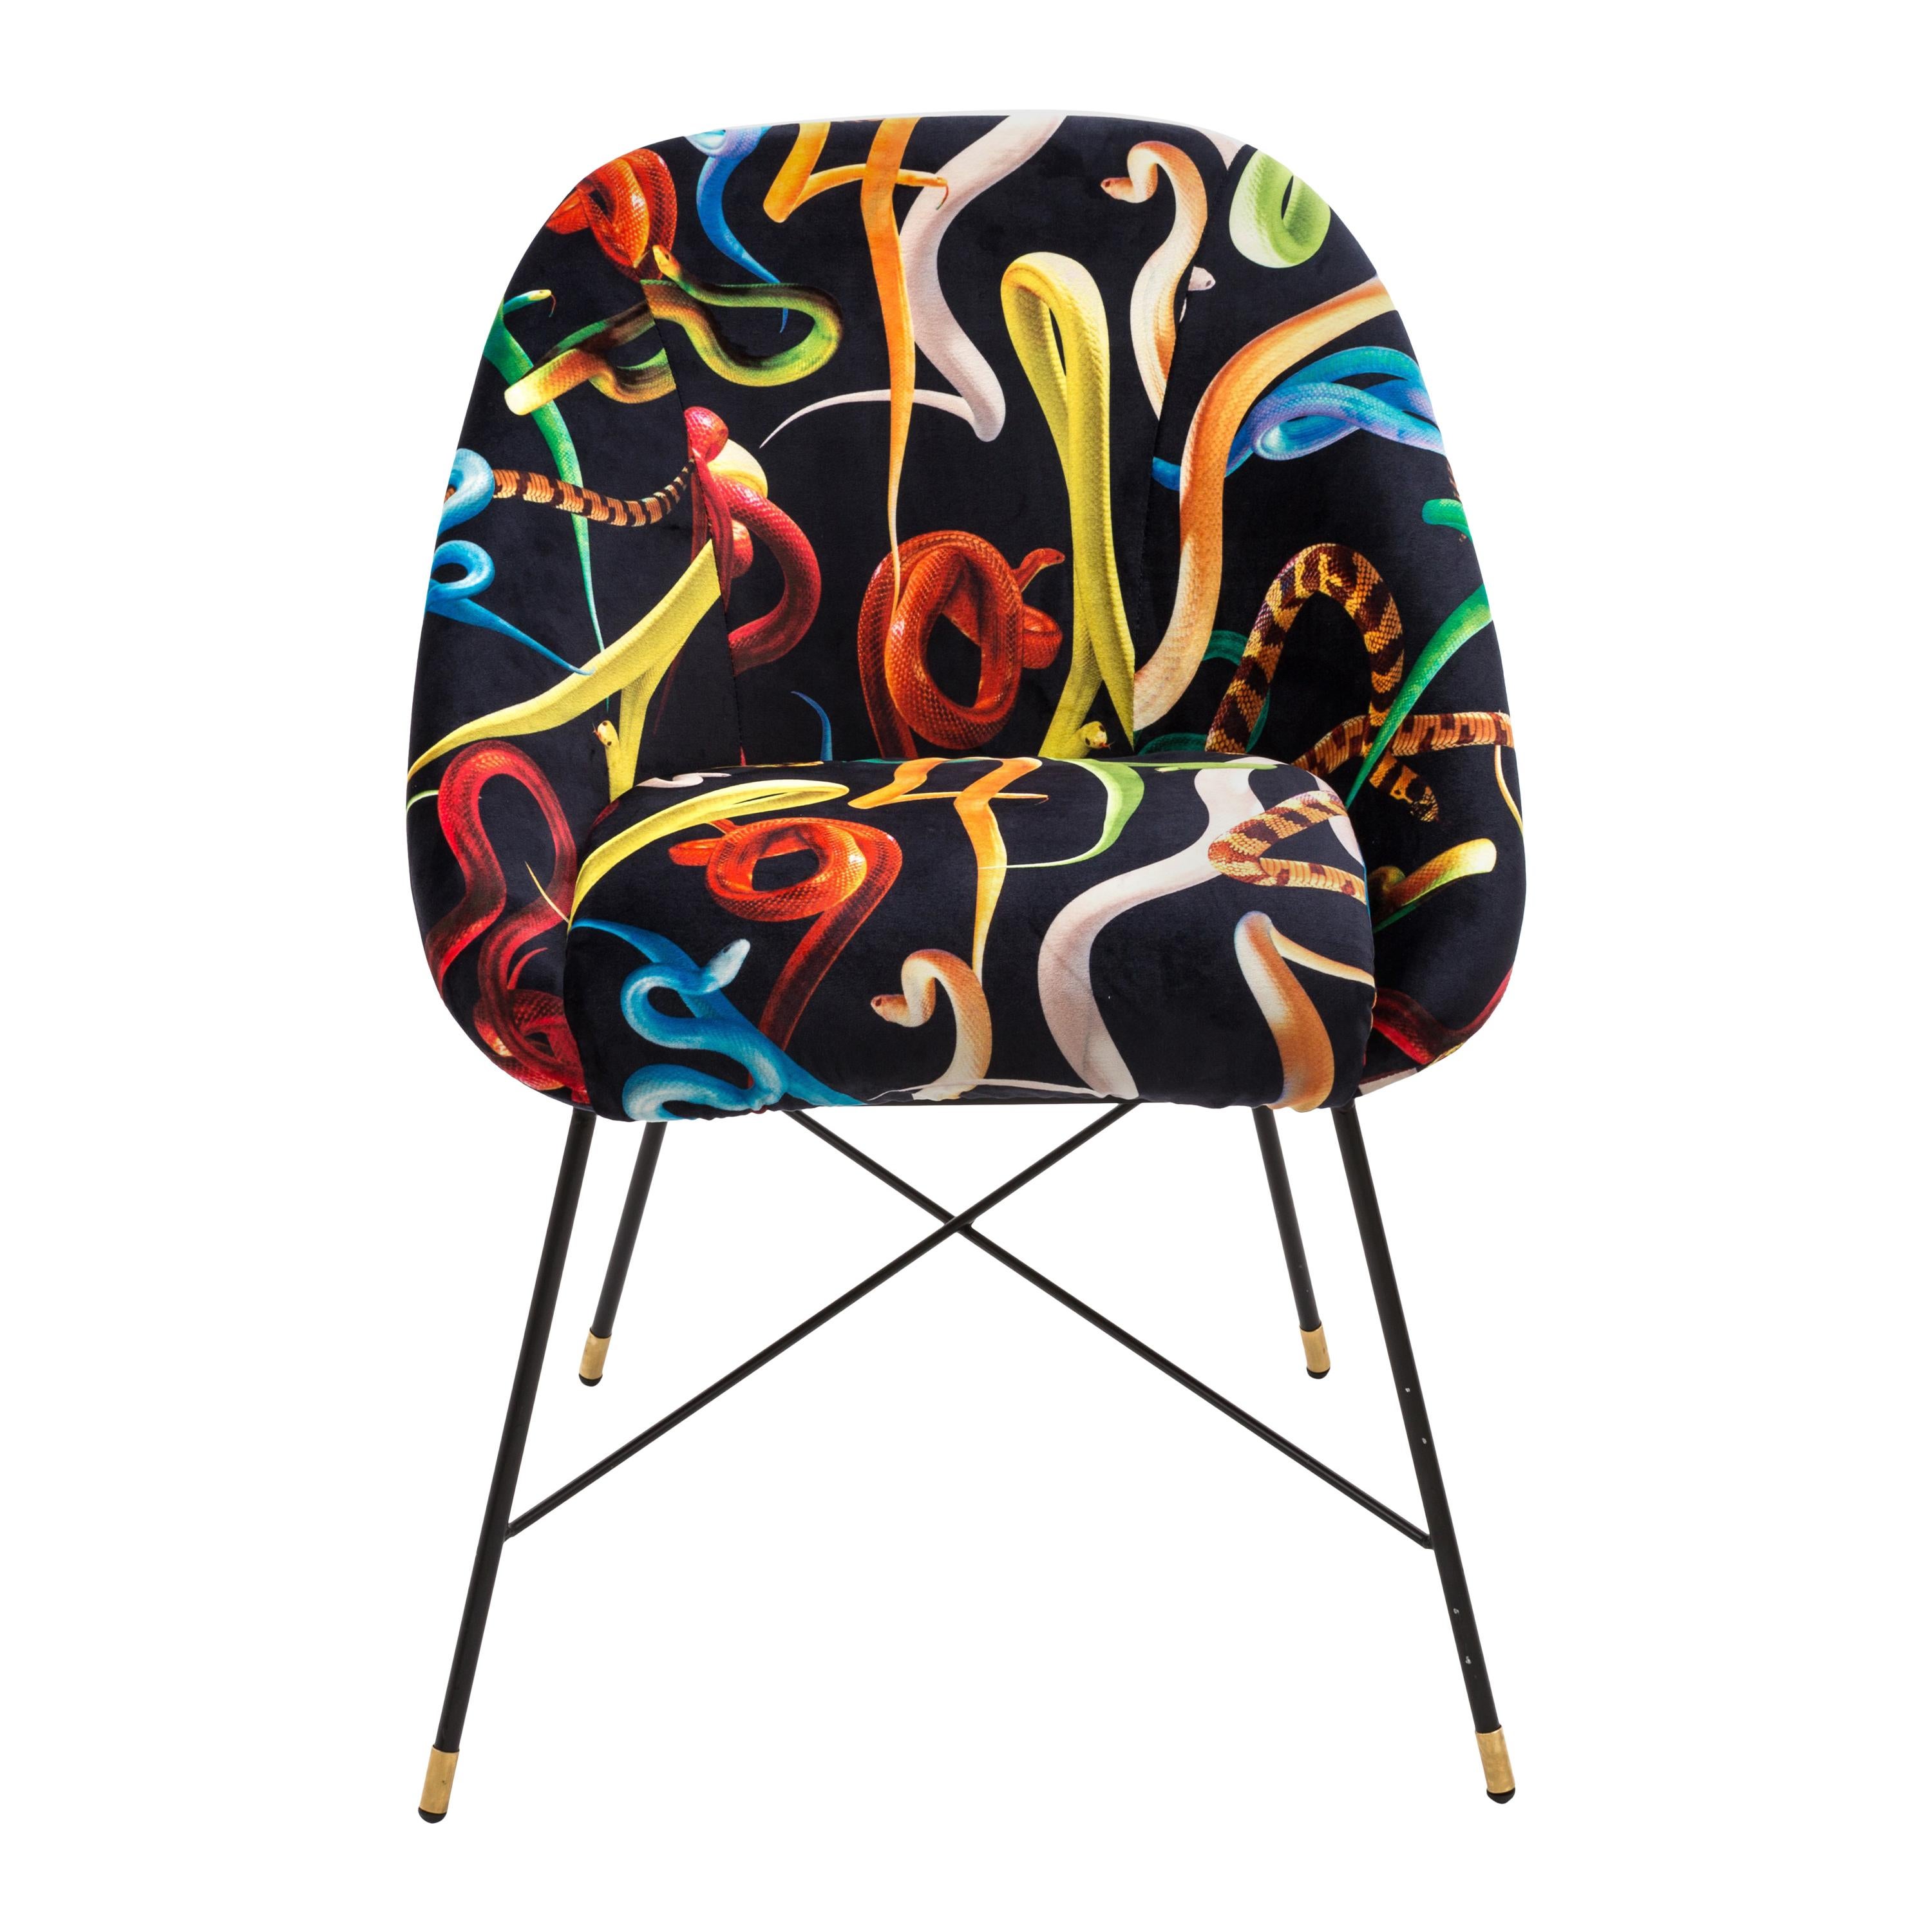 Seletti "Snakes" Upholstered Occasional Chair by Toiletpaper